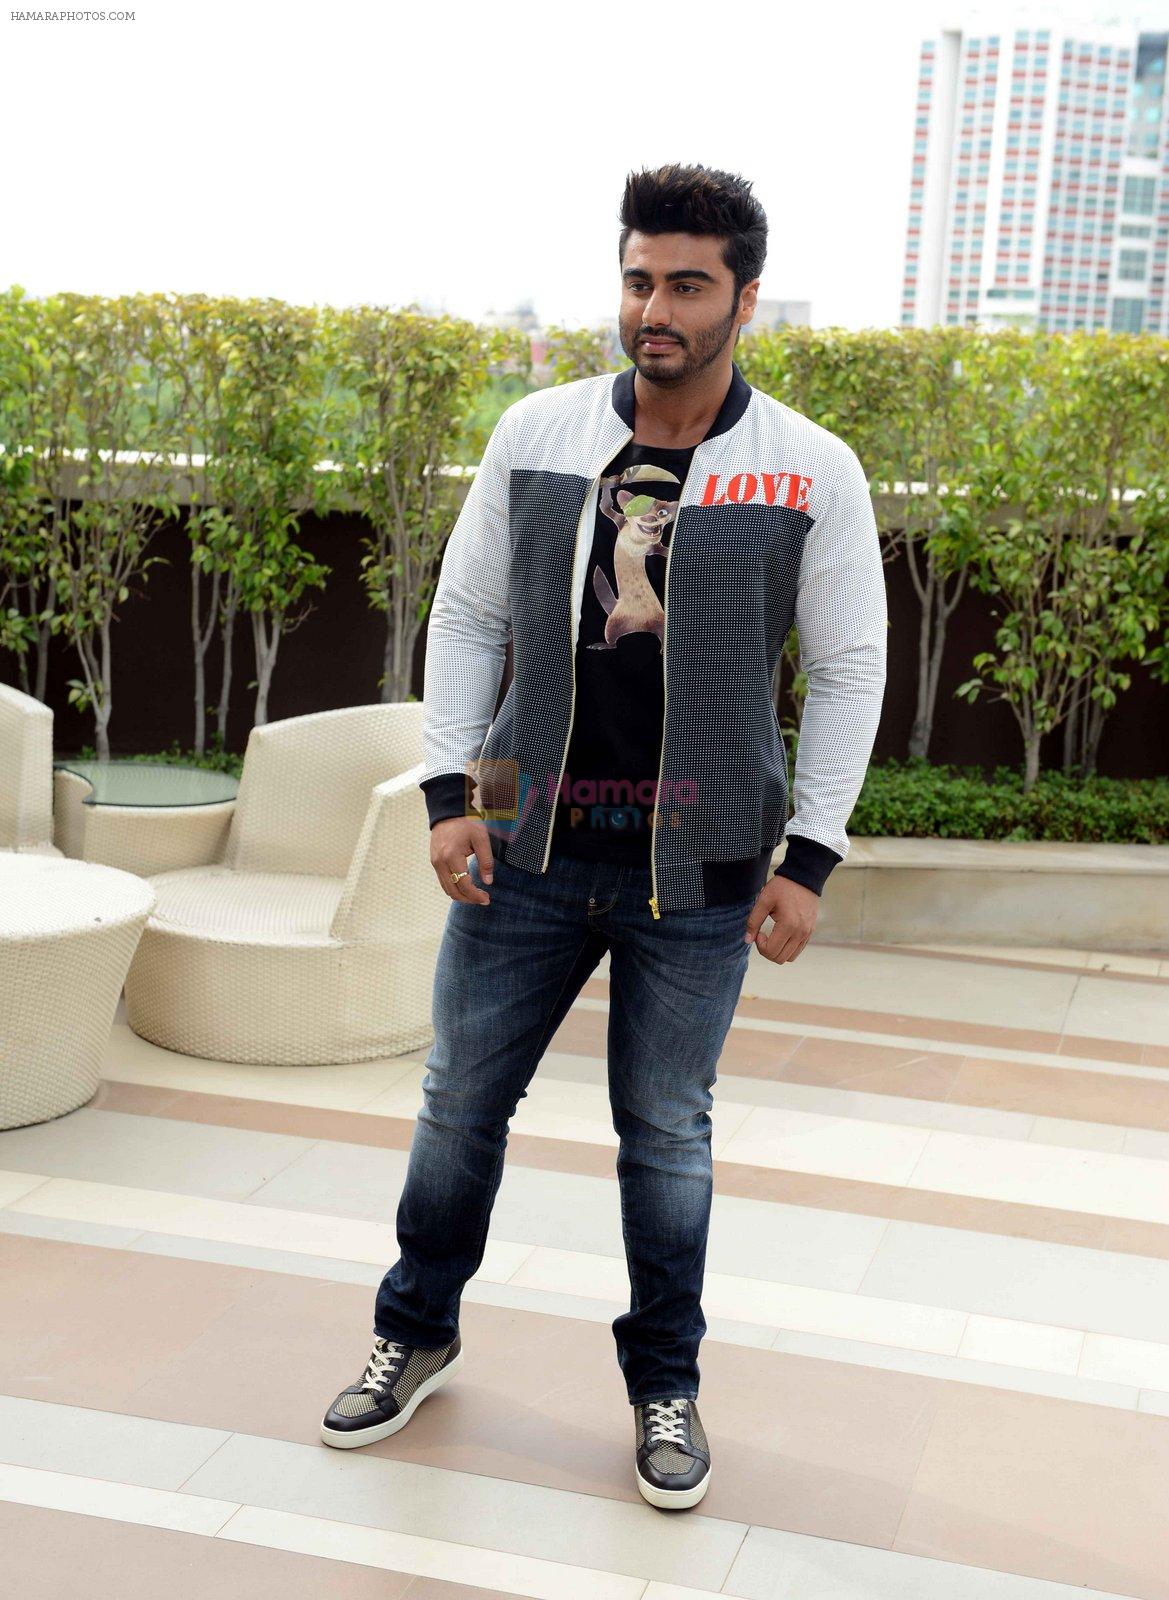 Arjun Kapoor at ice age promotions in delhi on 2nd July 2016